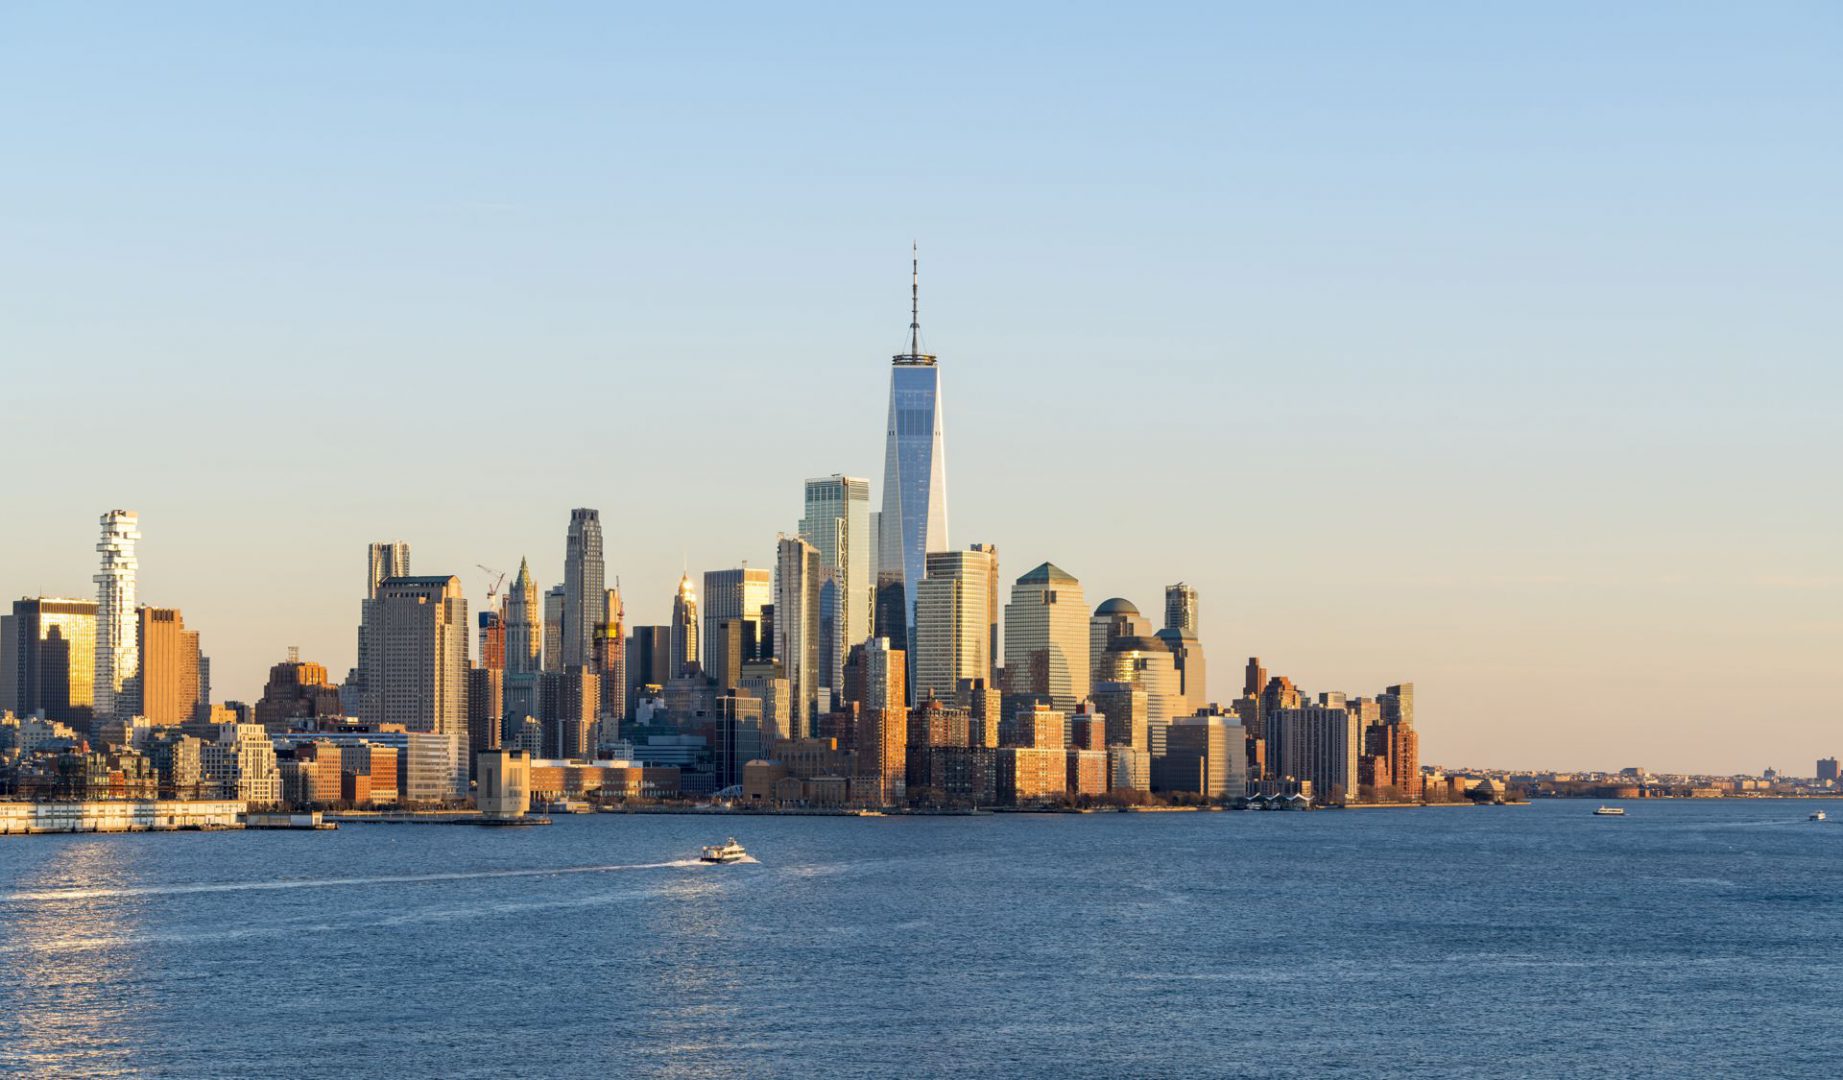 Beautiful scenic sunset evening view of lower manhattan, downtown of New York City, from Hoboken, New Jersey, over the Hudson river in USA. Famous attraction and iconic blue skyline view of america.